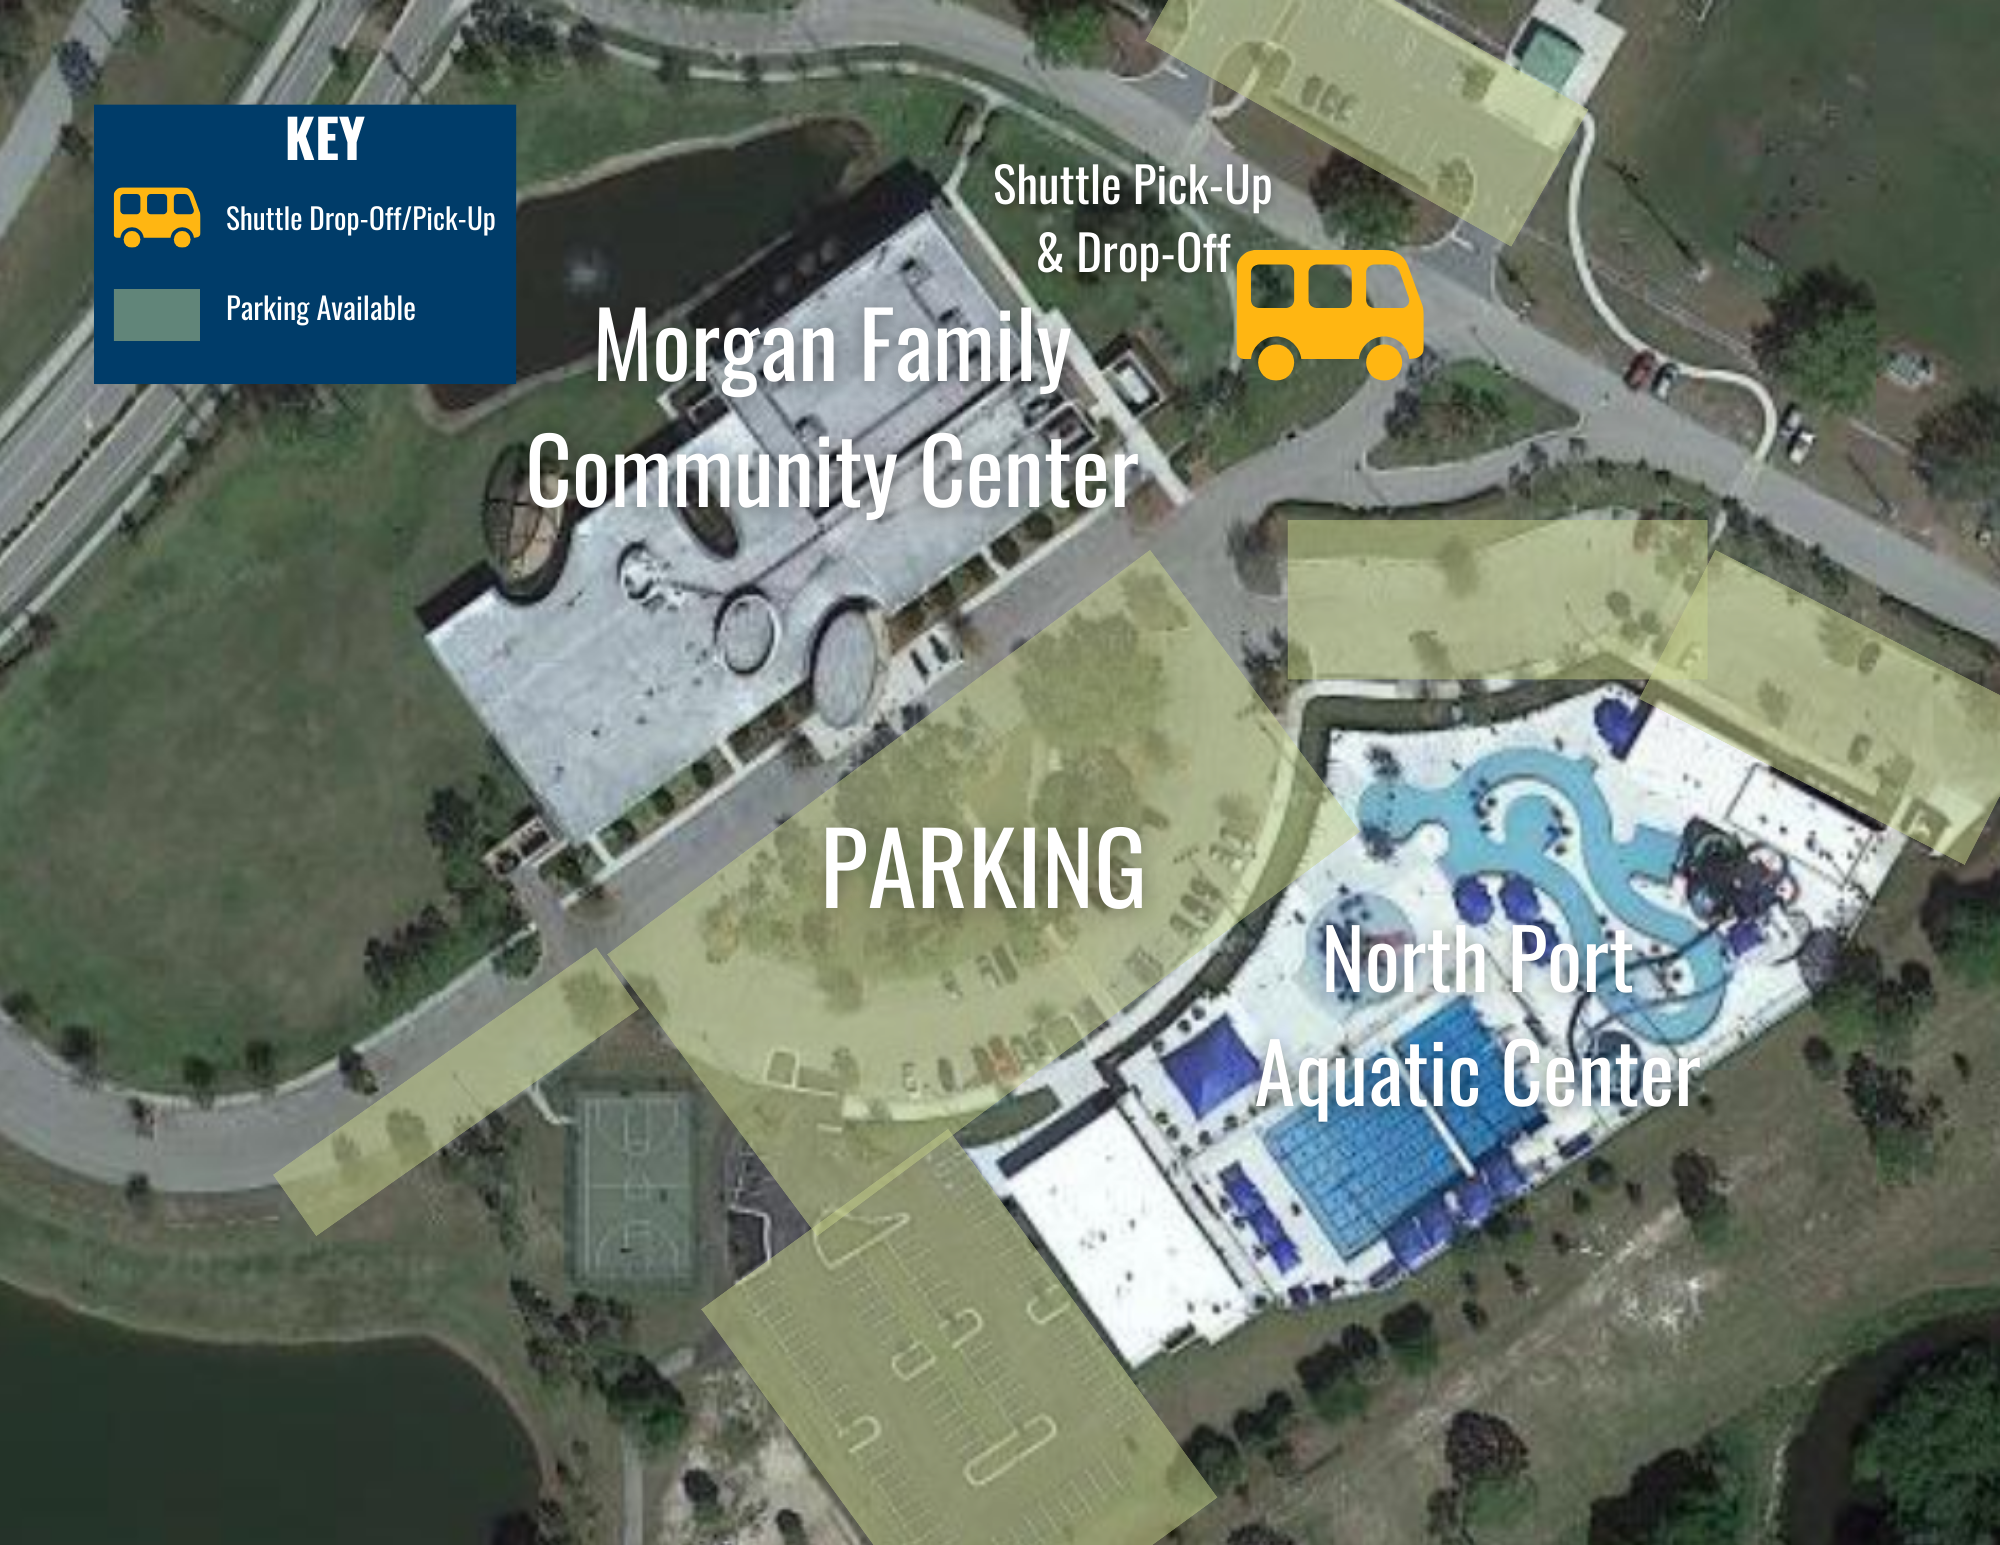 2023 ToT Shuttle Parking map call 941-429-7275 for assistance